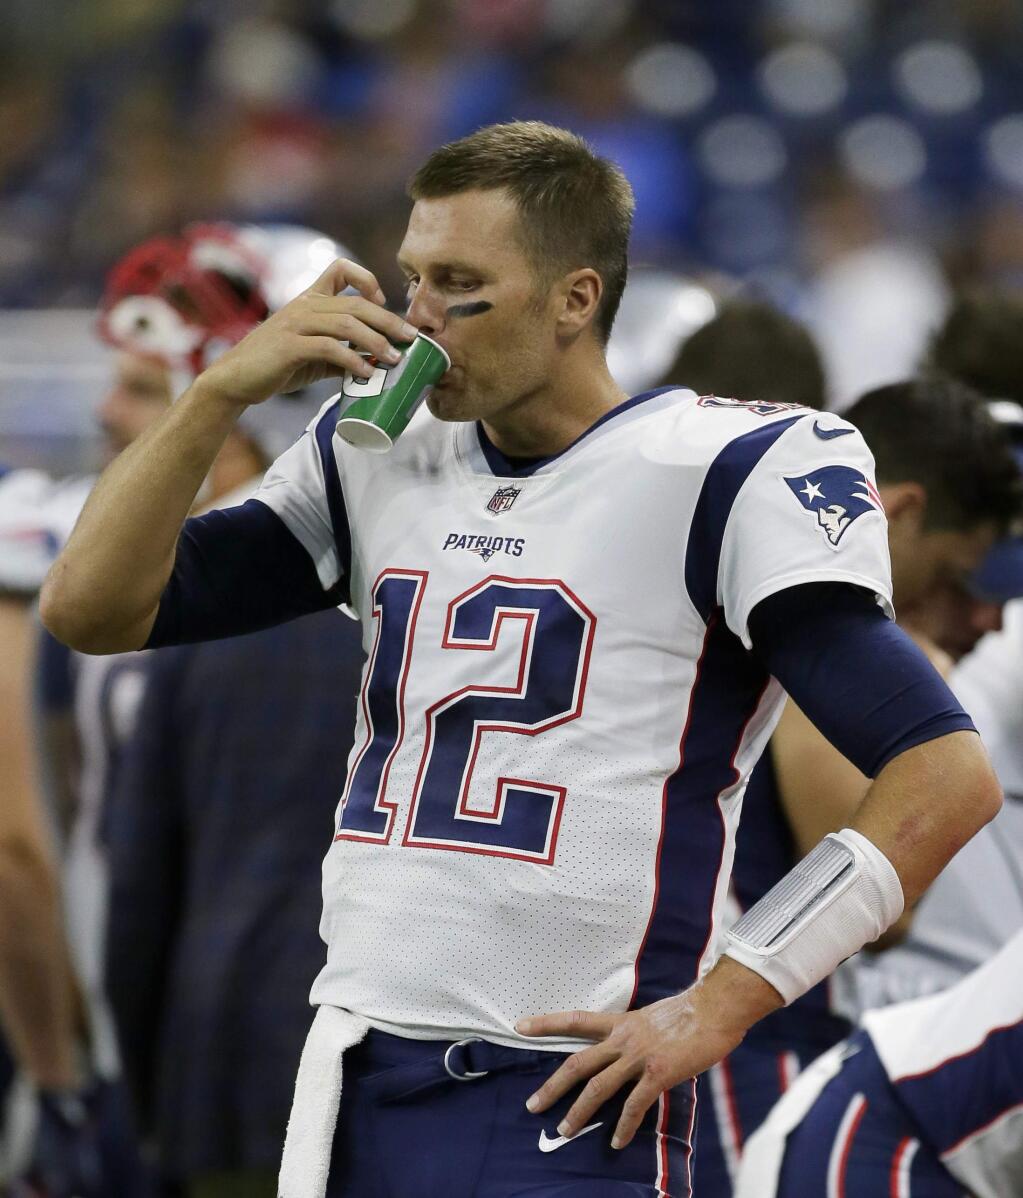 FILE - In this Aug. 25, 2017, file photo, New England Patriots quarterback Tom Brady (12) drinks on the sidelines during the second half of an NFL preseason football game against the Detroit Lions, in Detroit. Brady may not like strawberries, but he has skills when it comes to chugging beer. Appearing Monday, March 12, 2018, on CBS's 'The Late Show with Stephen Colbert,' Brady promoted his book 'The TB12 Method,' in which he writes about diet and athletic performance. That includes abstaining from alcohol. Brady told Colbert he rarely drinks beer. But acknowledged he was a 'pretty good beer chugger back in the day.'(AP Photo/Duane Burleson, File)